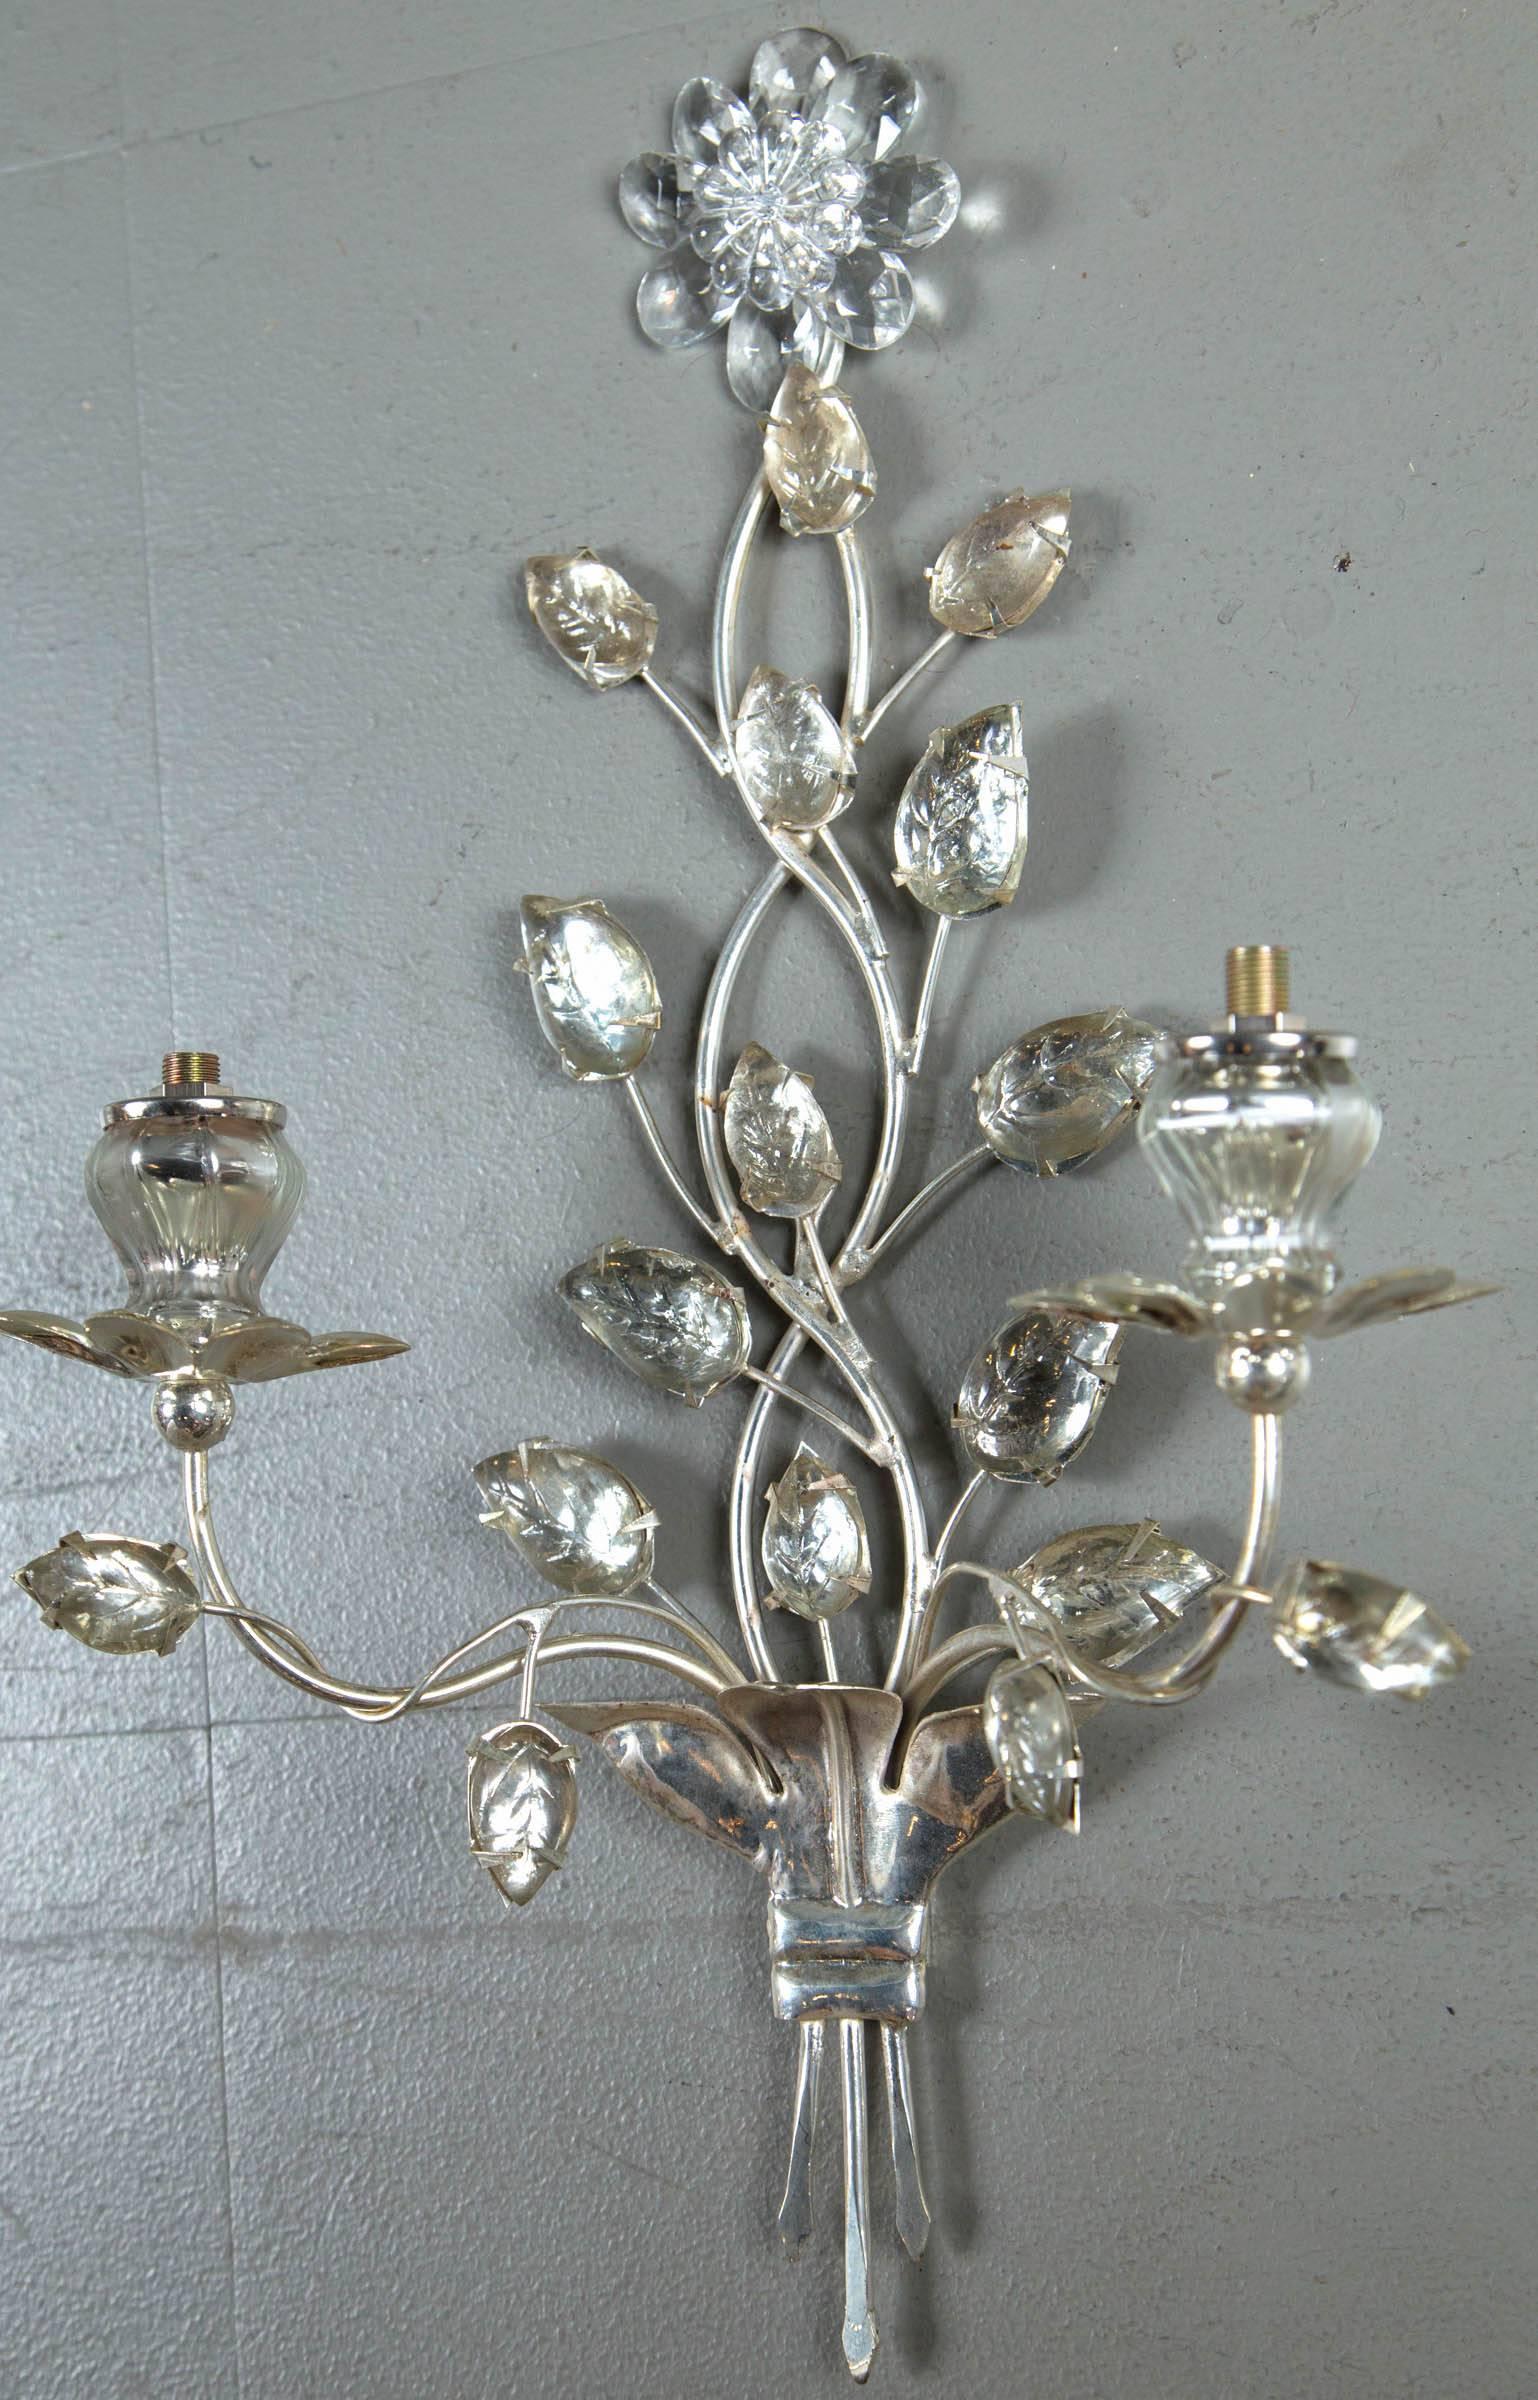 Set of 12 circa 1930 French Silver Plated Sconces with Double Lights For Sale 3